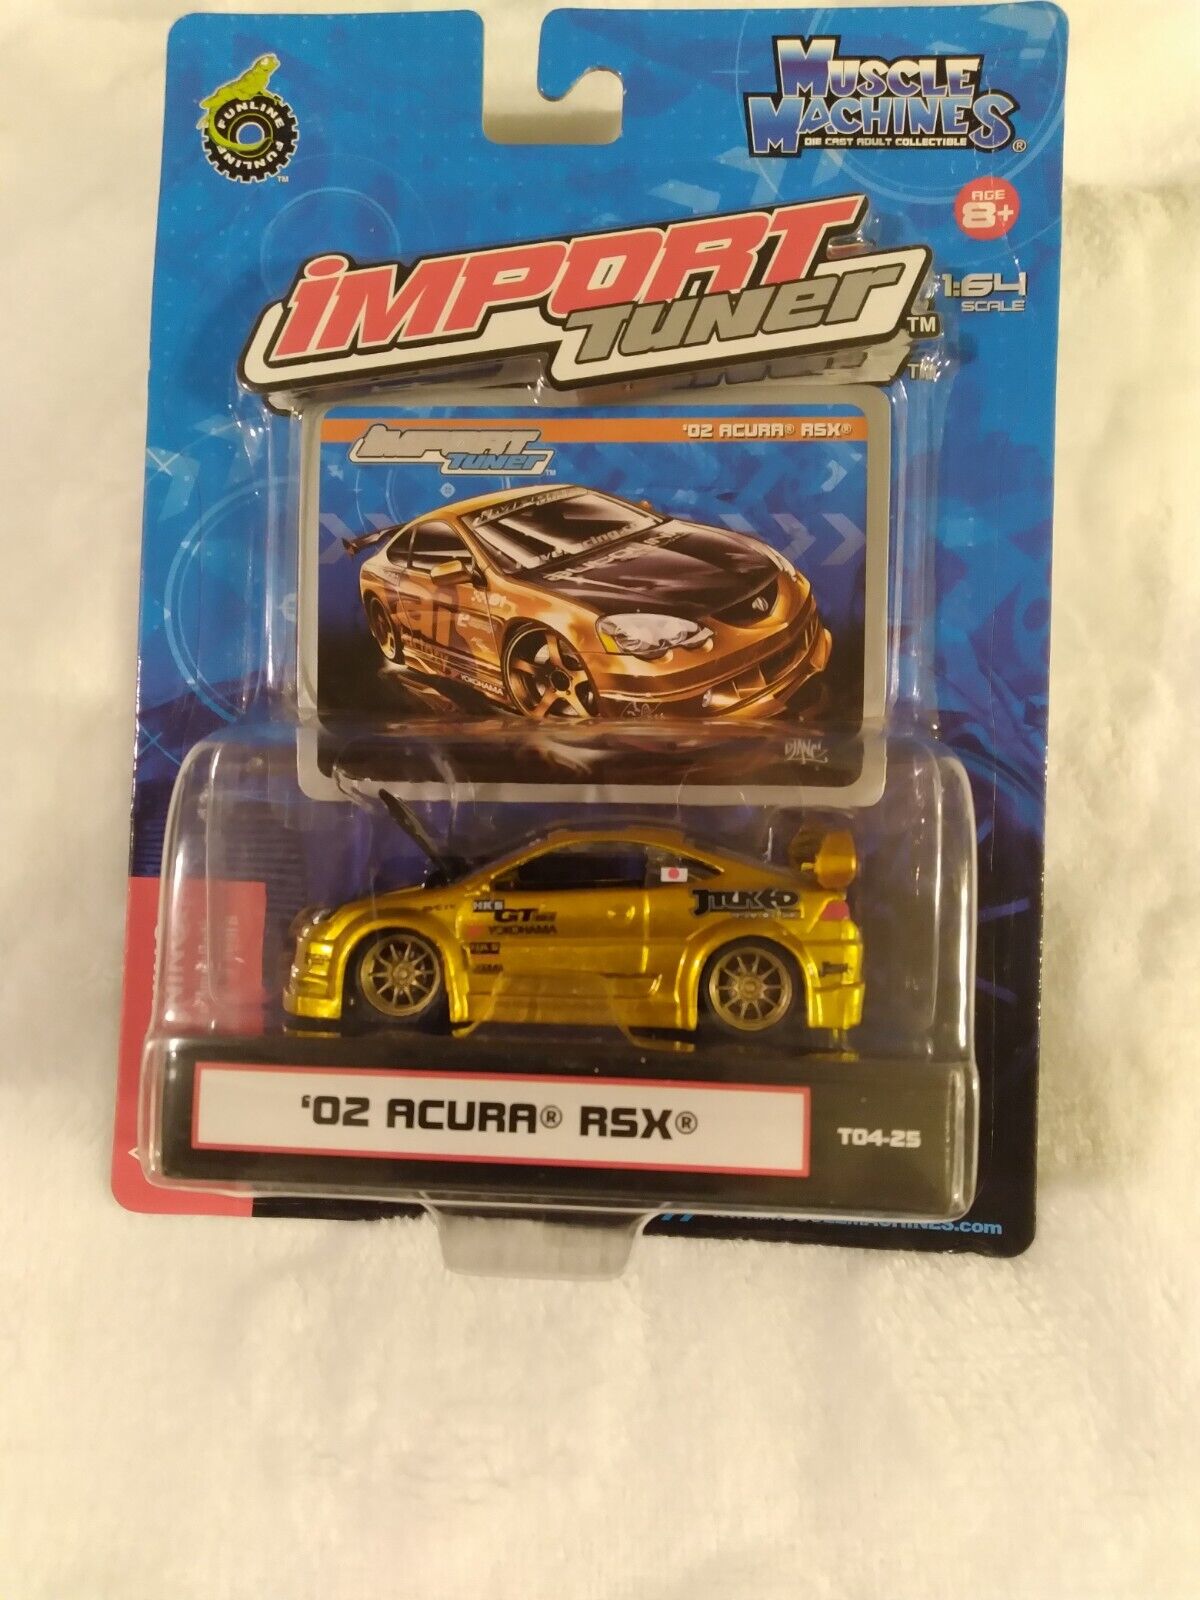 MUSCLE MACHINES 1:64 SCALE '02 ACURA RSX